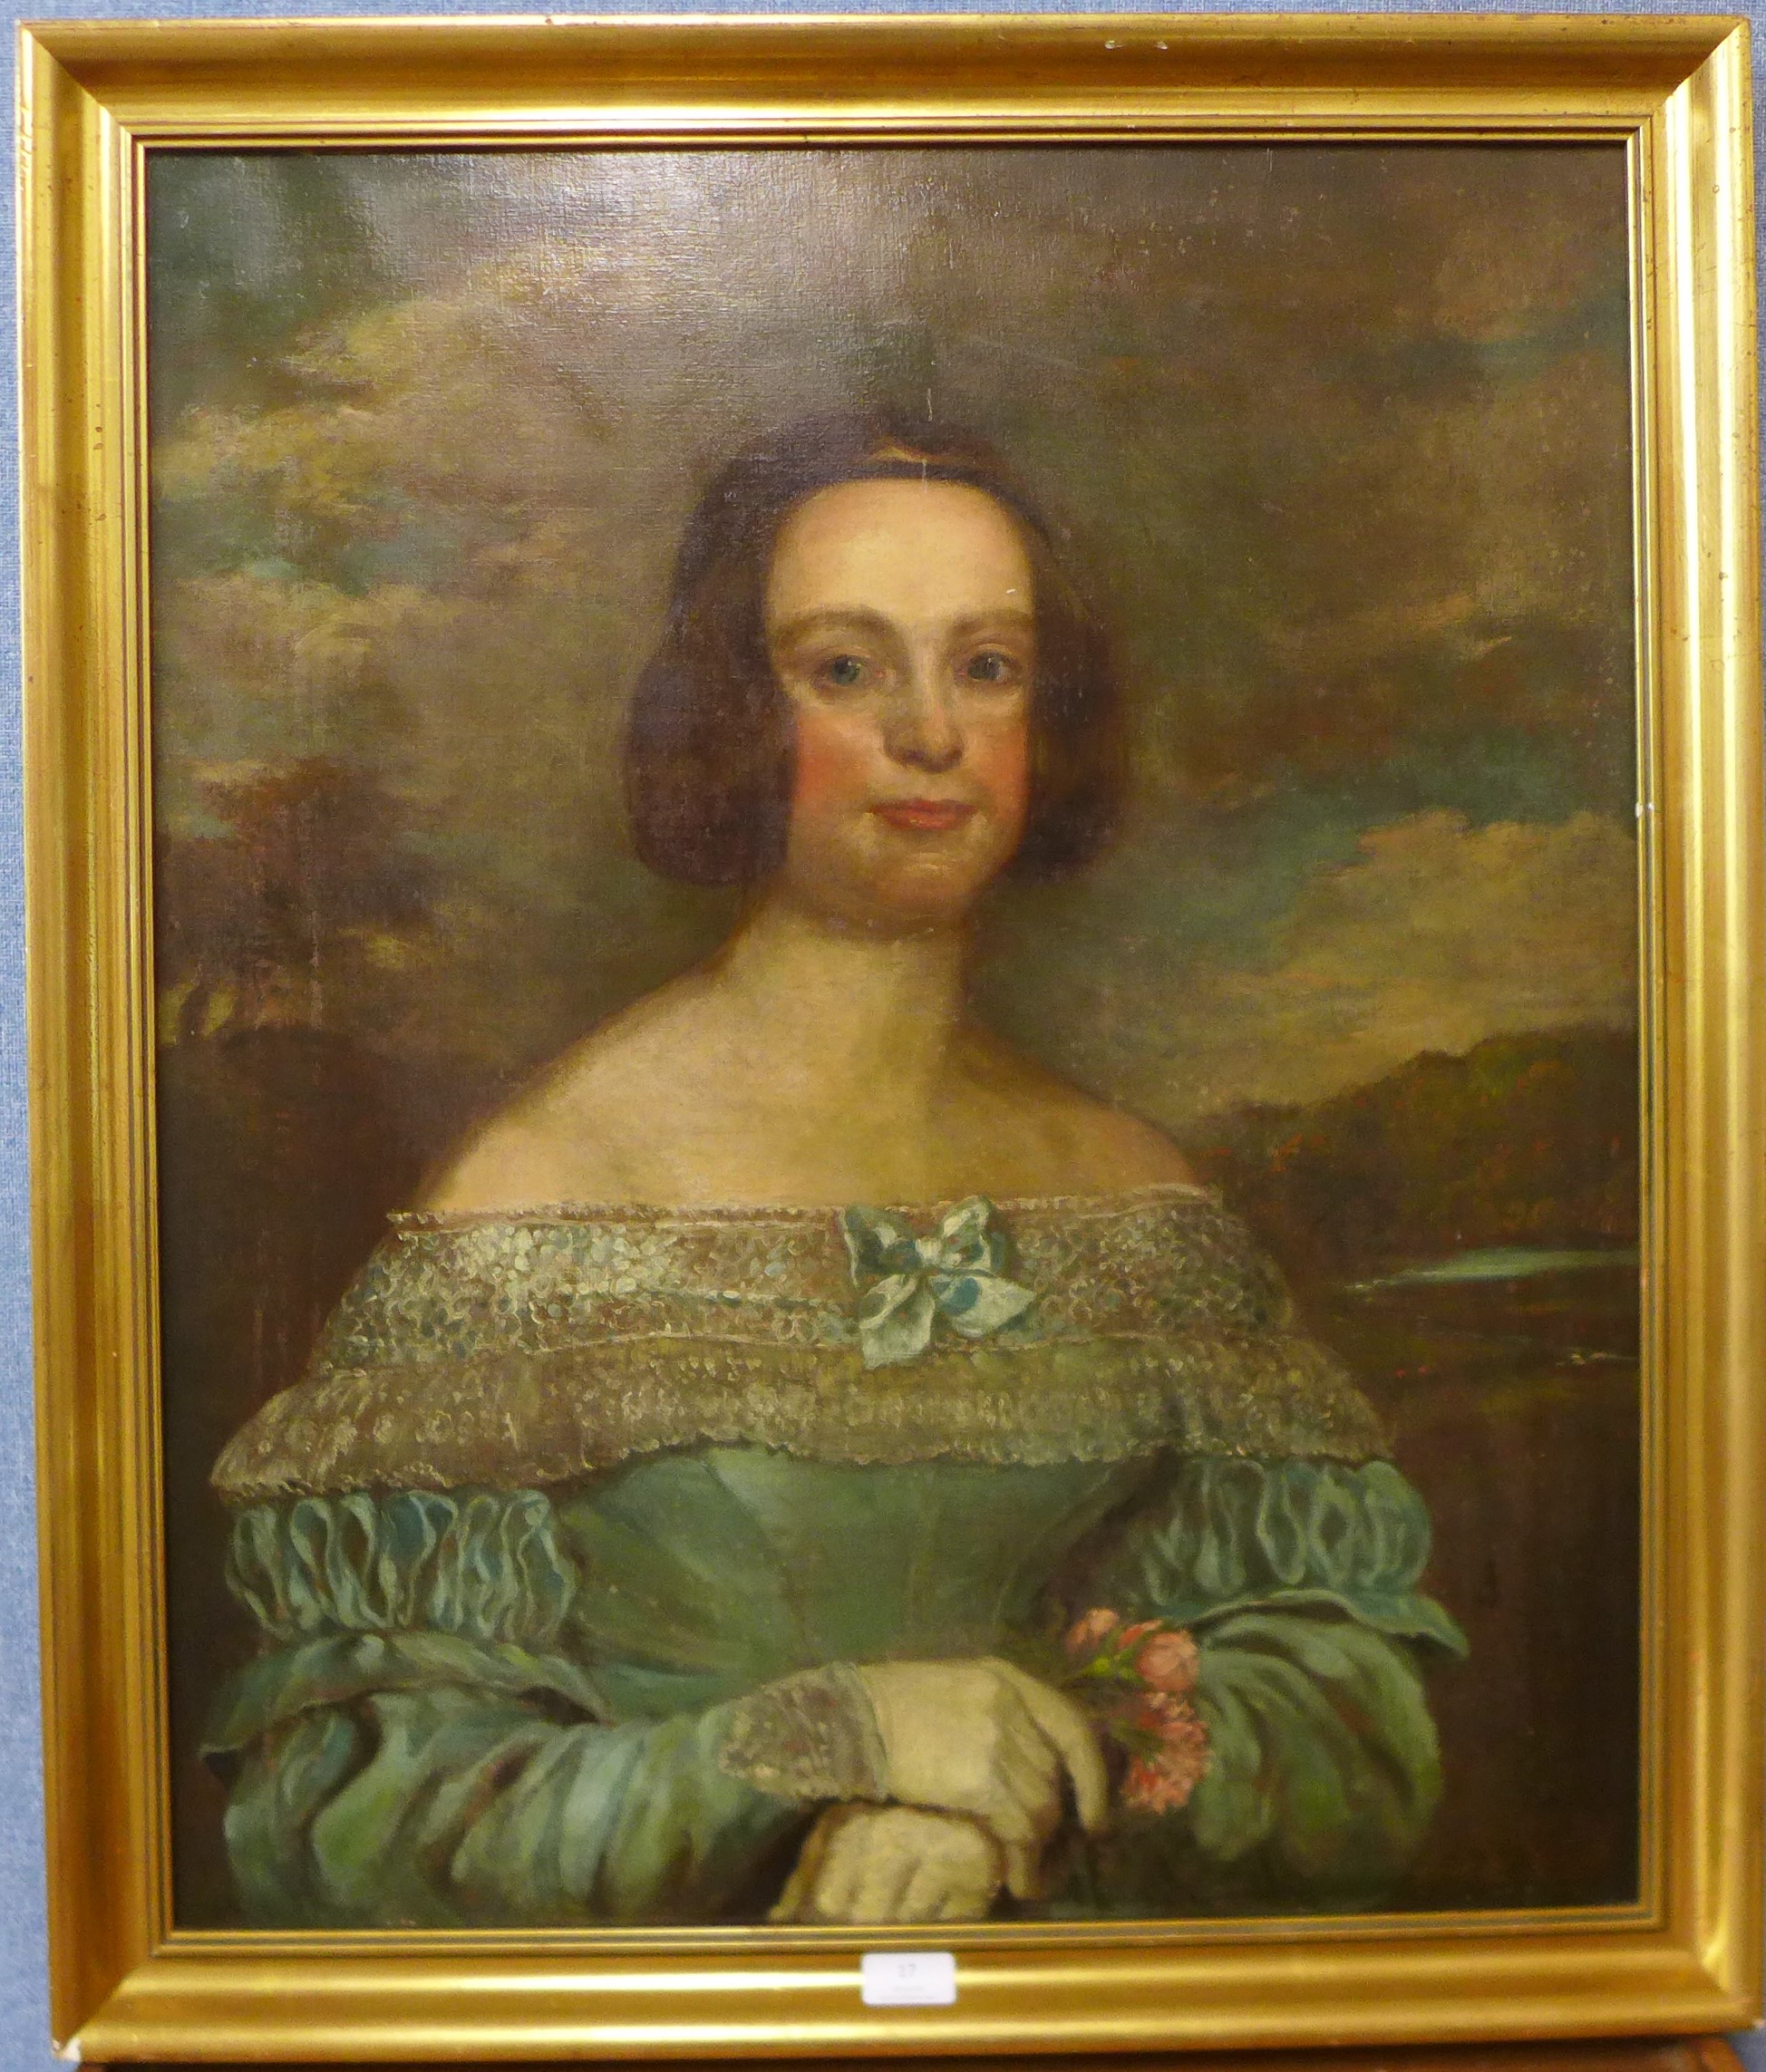 English School (19th Century), portrait of a lady, oil on canvas, 75 x 63cms, framed - Image 2 of 2